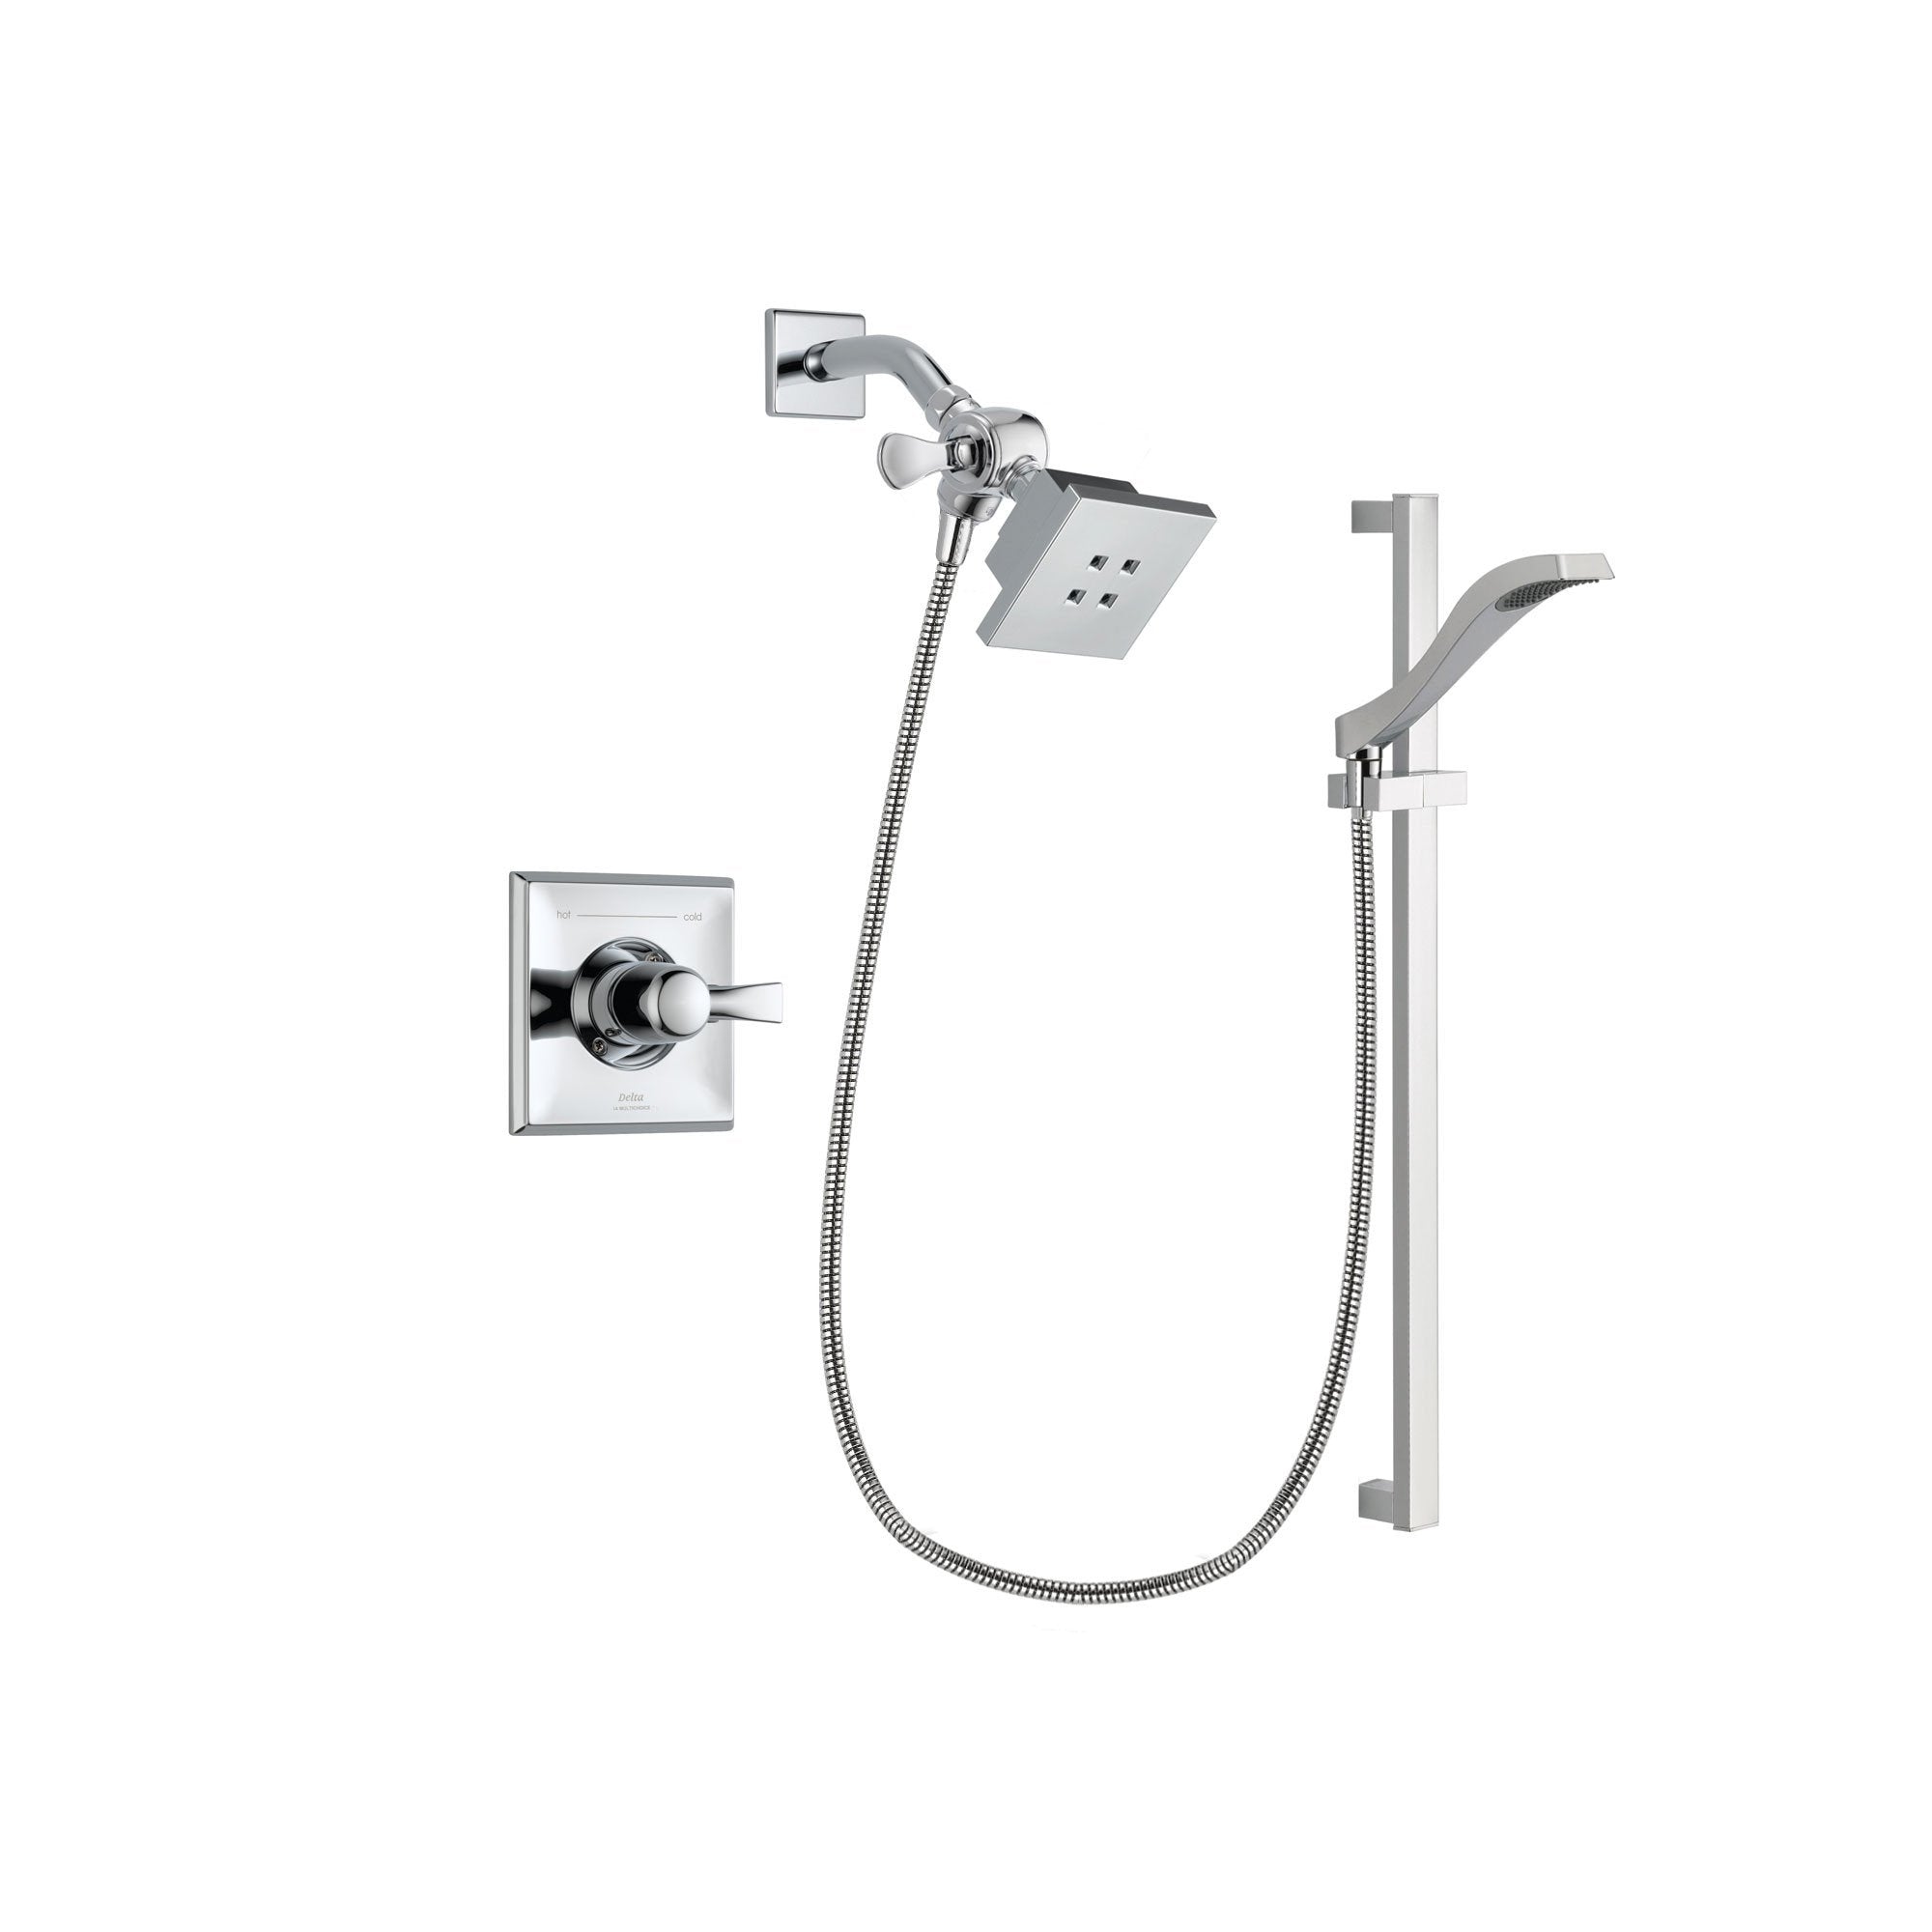 Delta Dryden Chrome Finish Shower Faucet System Package with Square Showerhead and Wall Mount Slide Bar with Handheld Shower Spray Includes Rough-in Valve DSP0152V